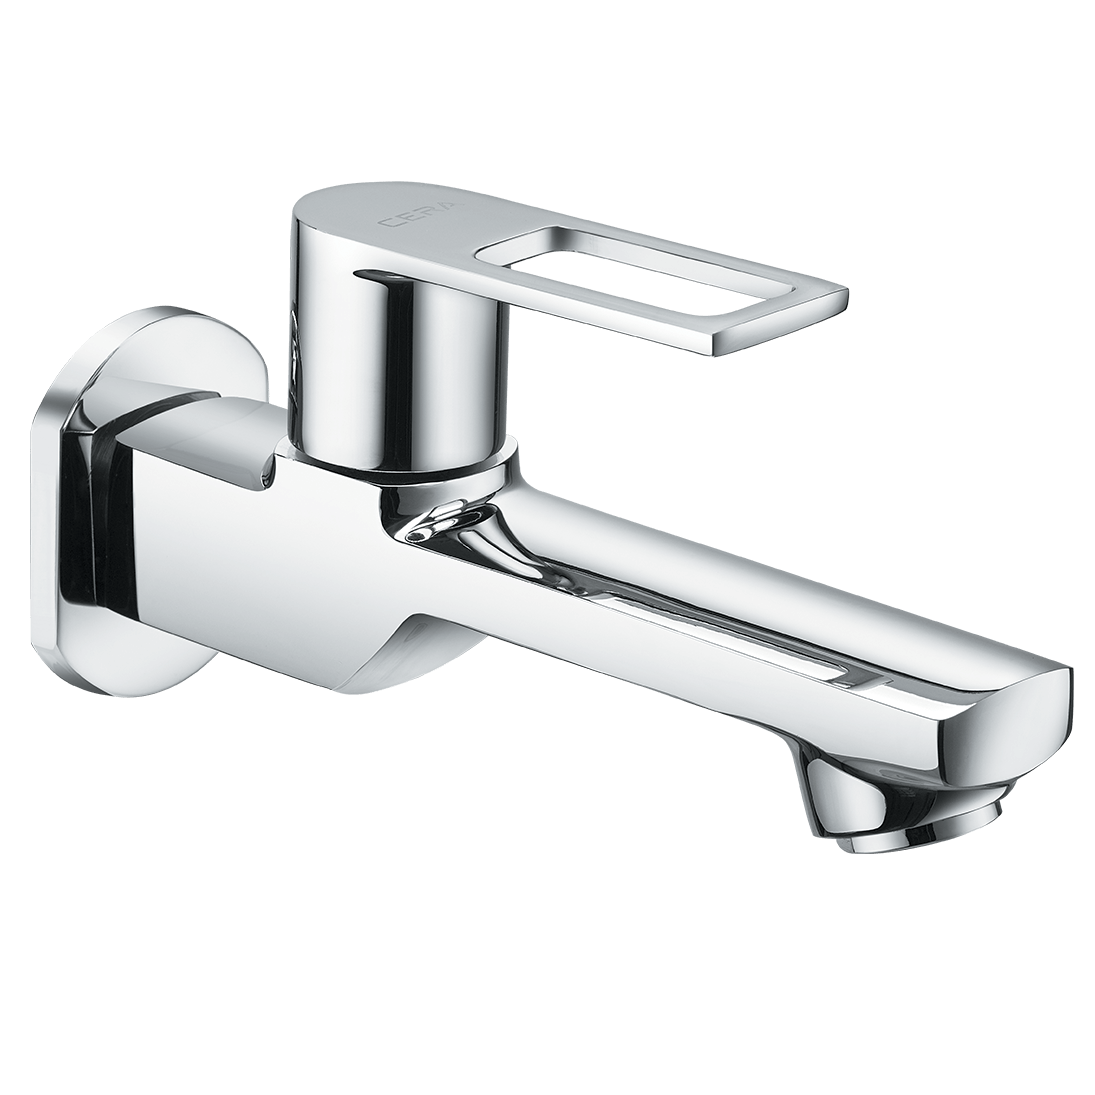 Cera Bib cock long nose with wall flange Winslet Faucets F1099152